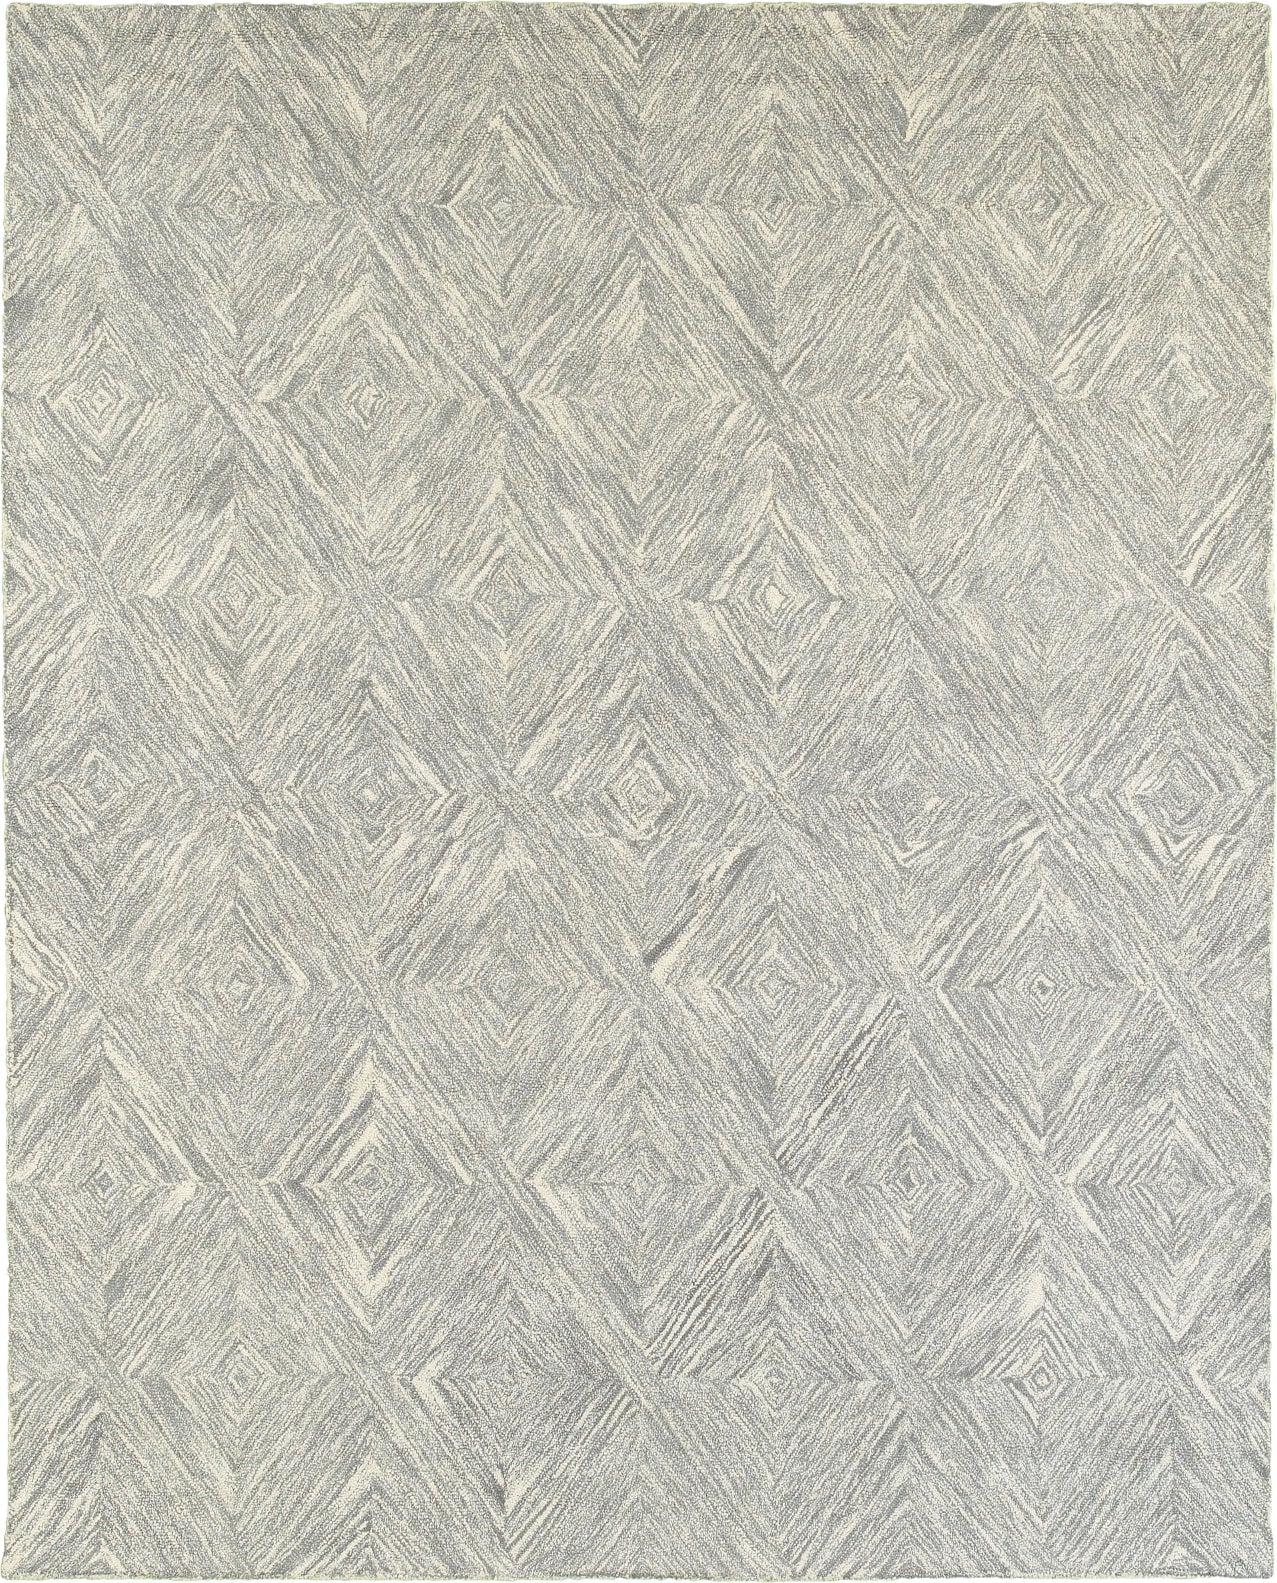 LR Resources Integrity 12020 Gray Area Rug main image